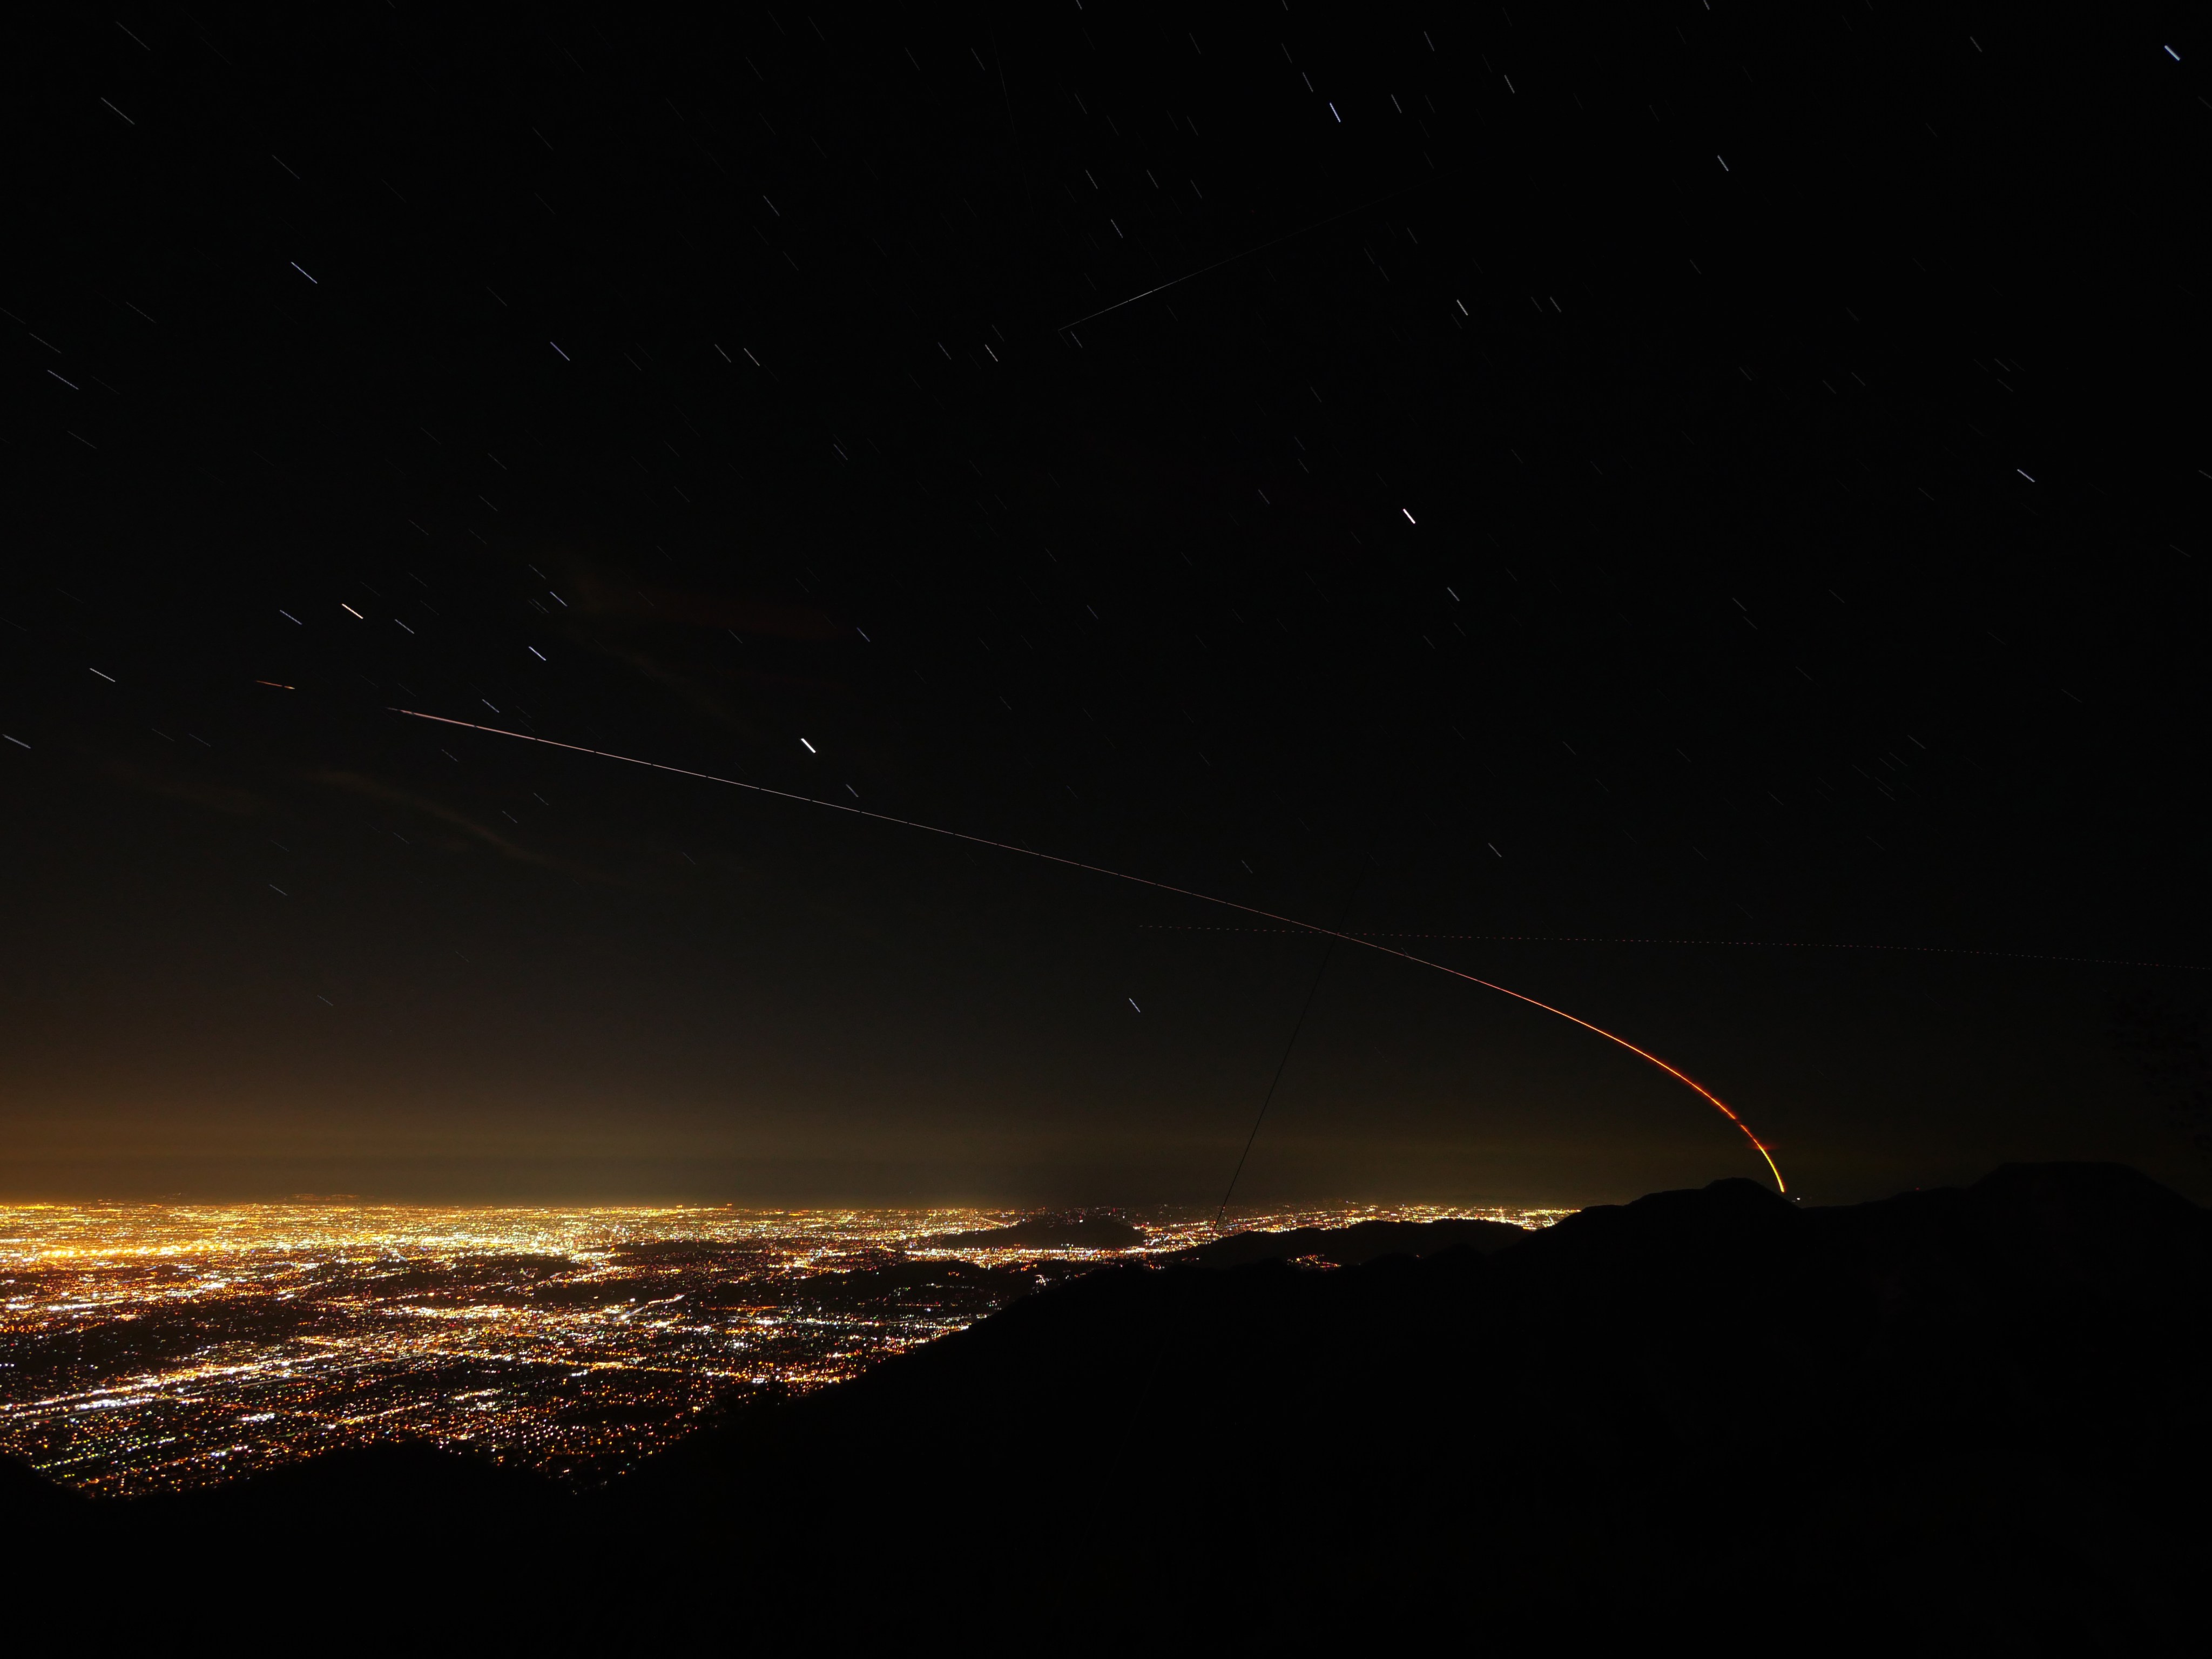 Rocket trail arcing over Los Angeles.